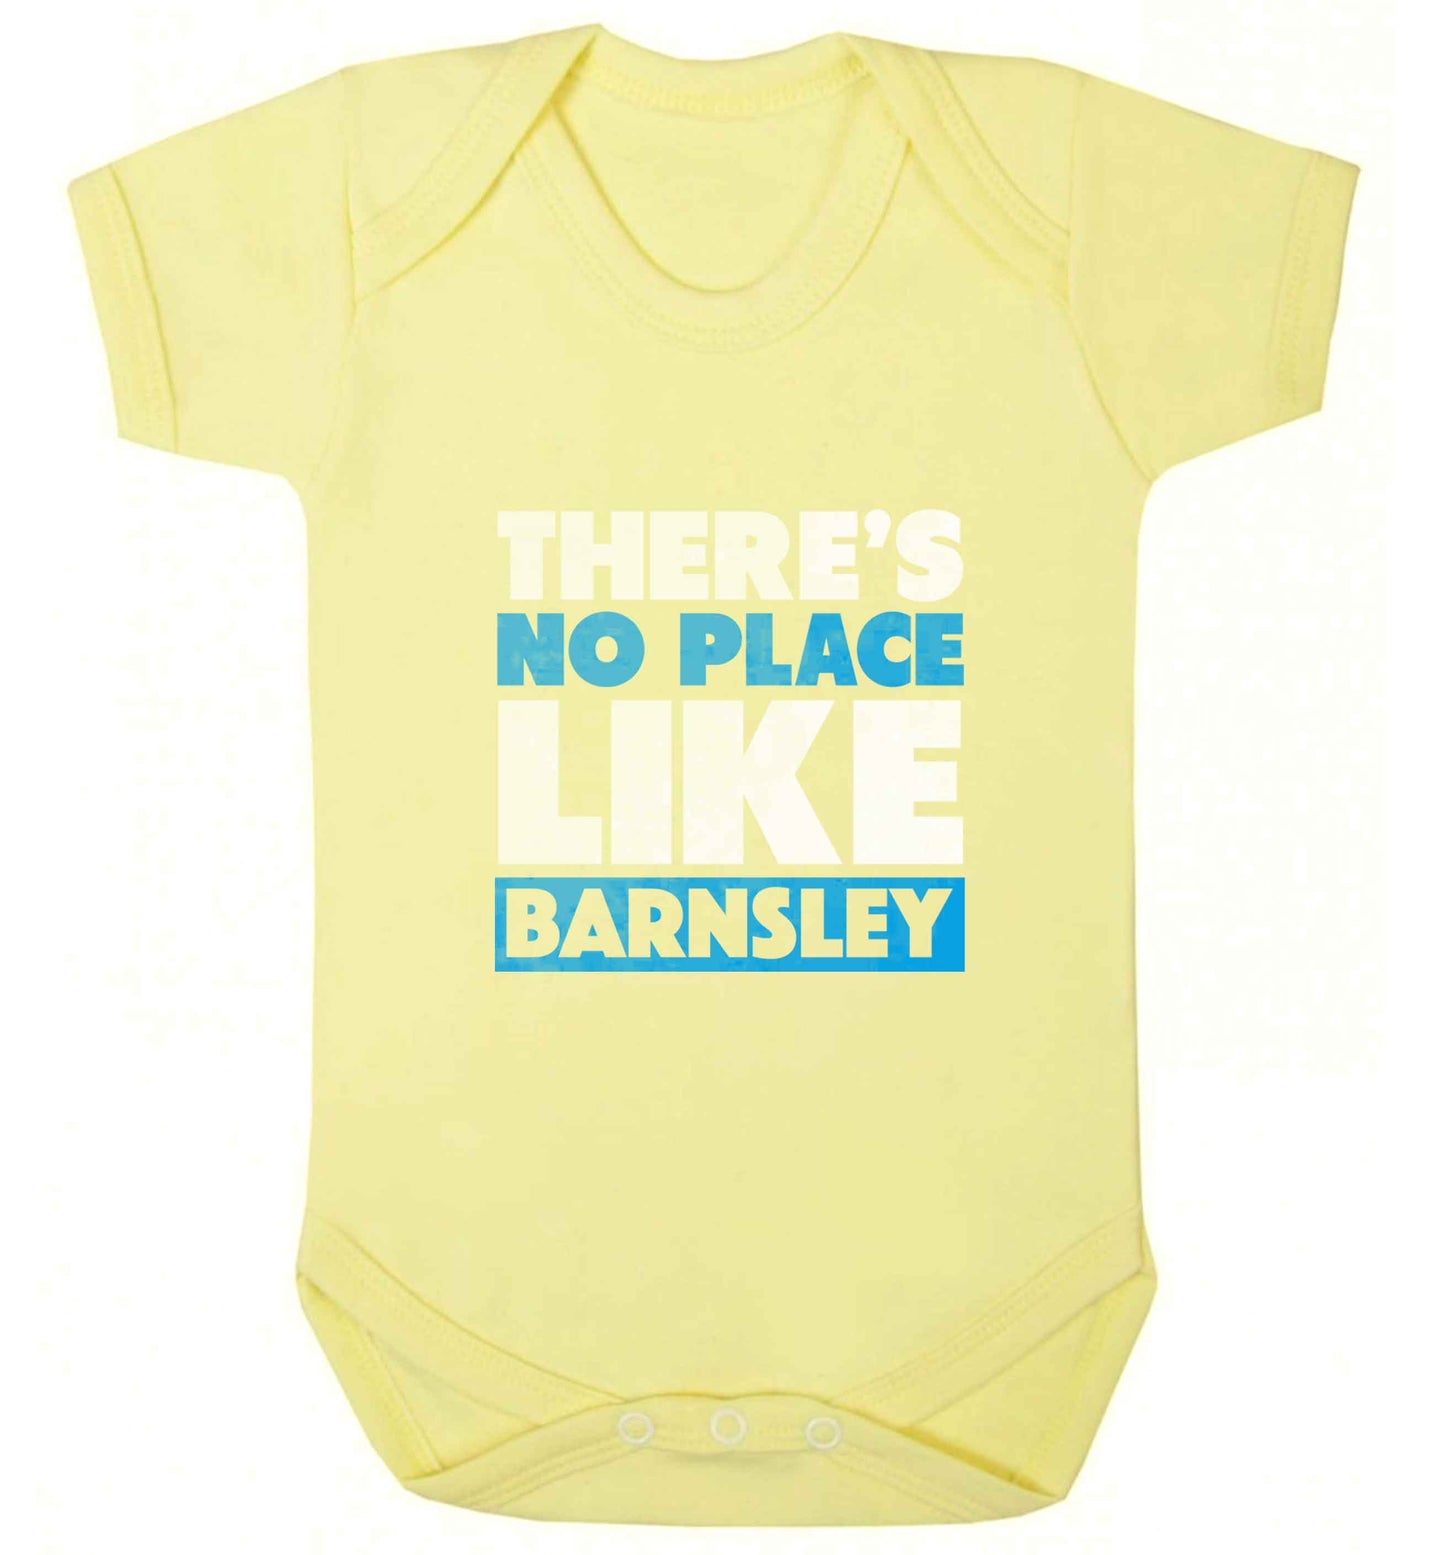 There's No Place Like Barnsley baby vest pale yellow 18-24 months